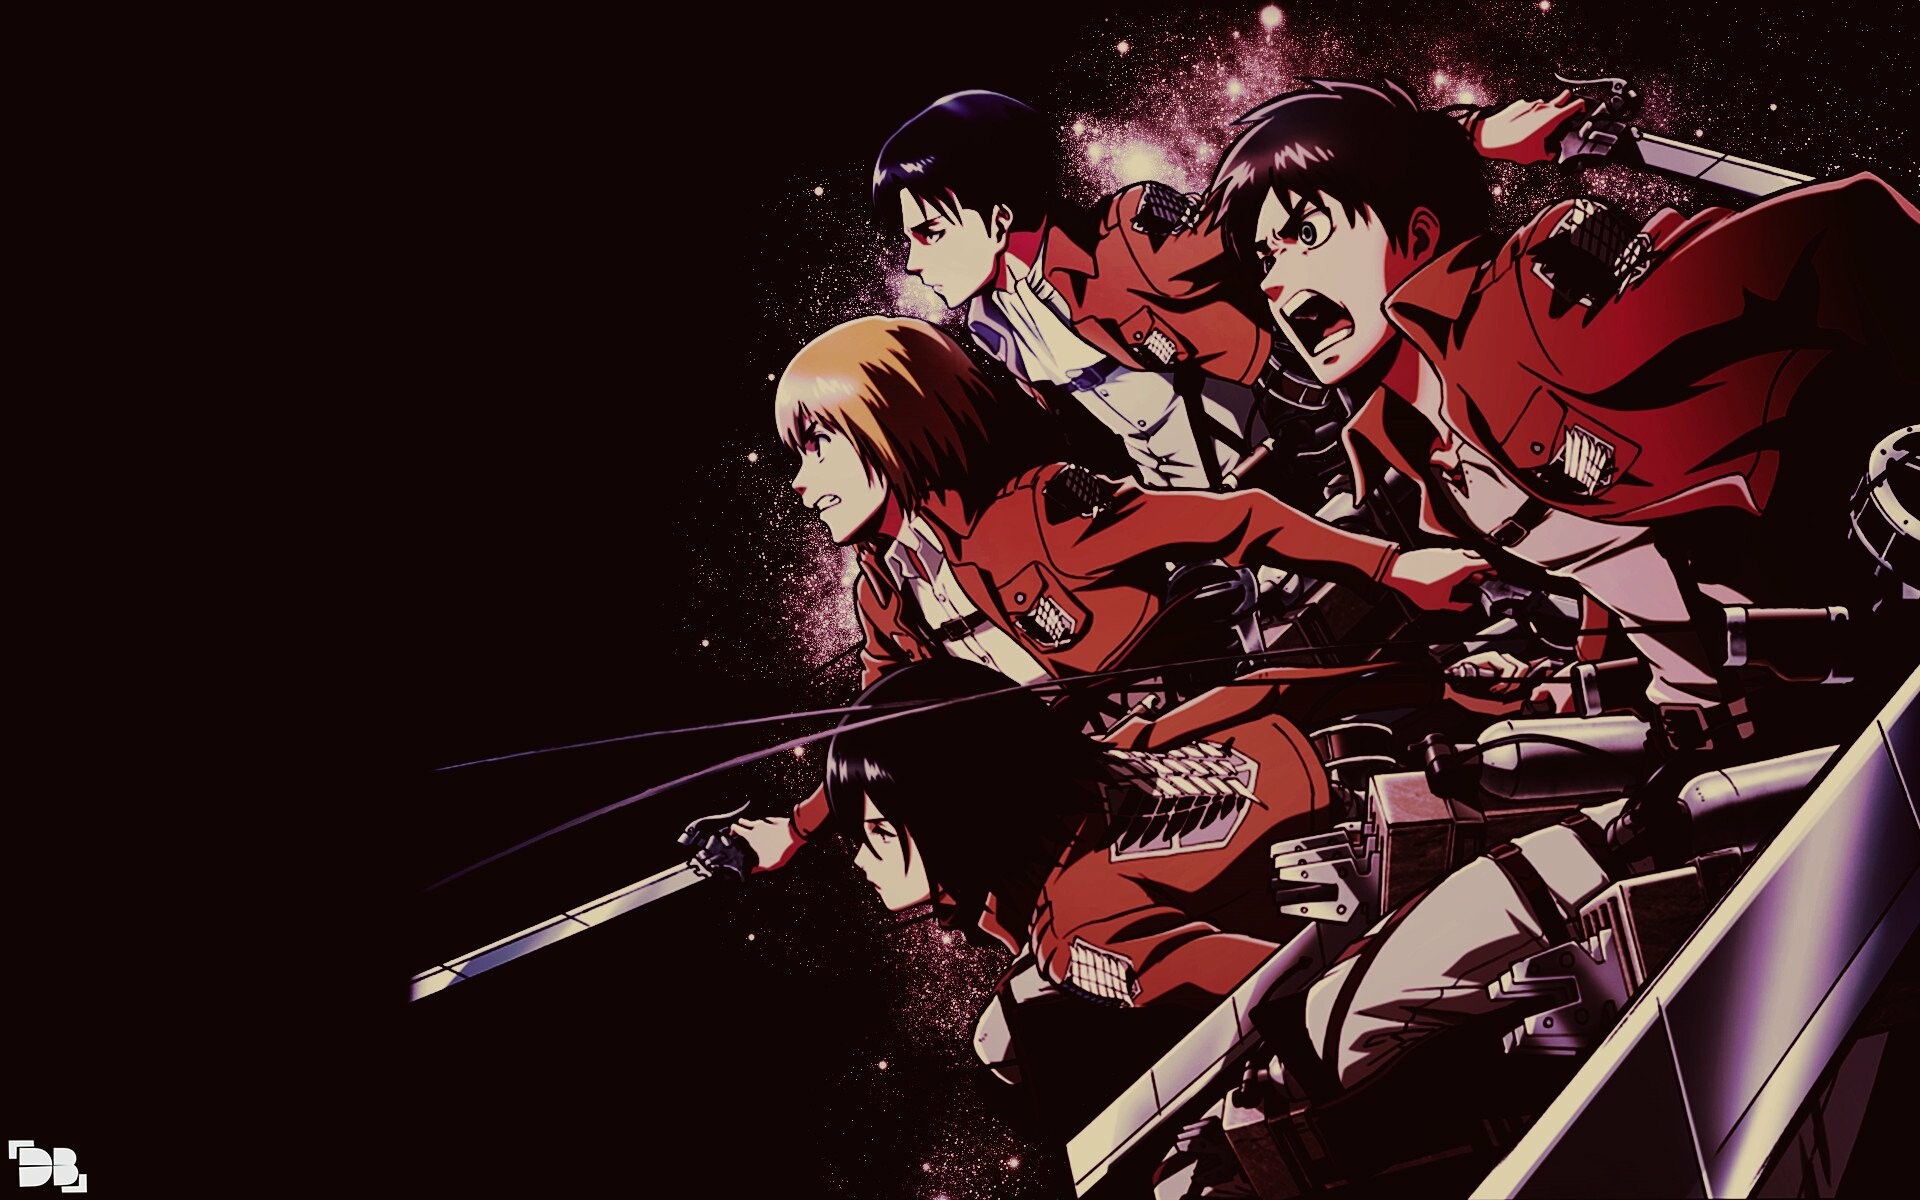 Attack on Titan: The Final Season: The story centers around Eren Jaeger and his childhood friends Mikasa Ackermann and Armin Arlelt. 1920x1200 HD Background.